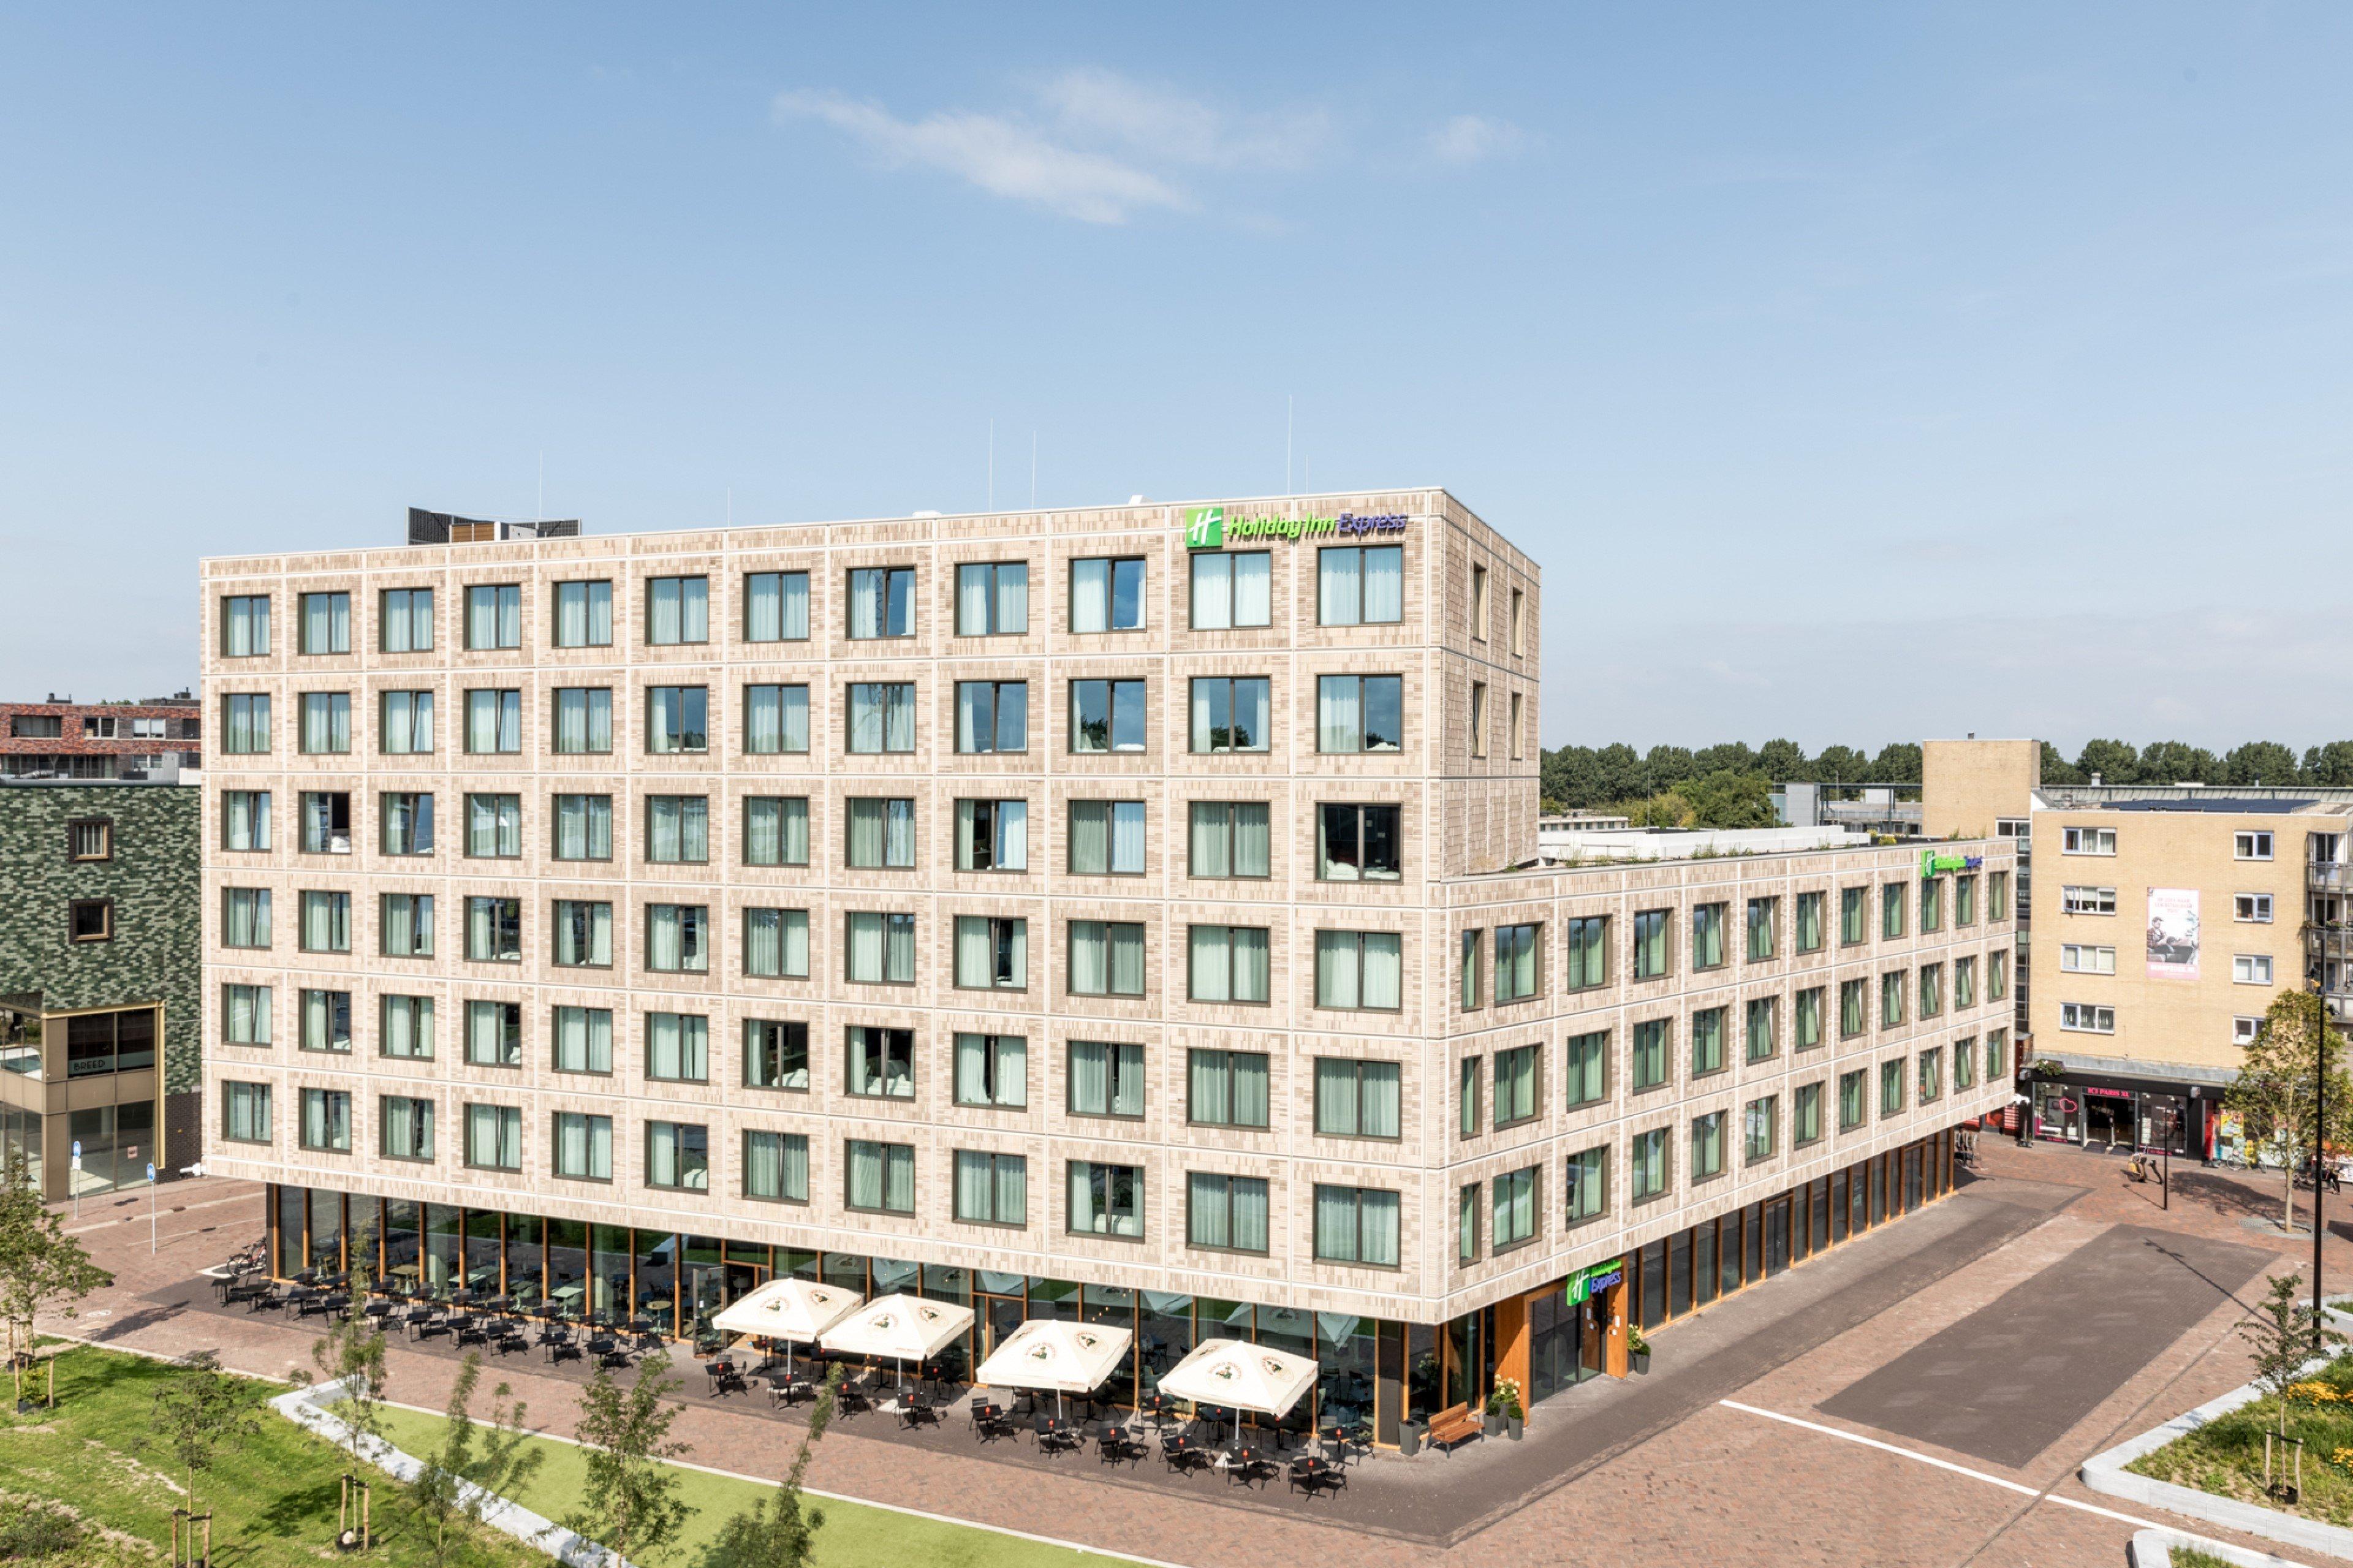 Holiday Inn Express Almere